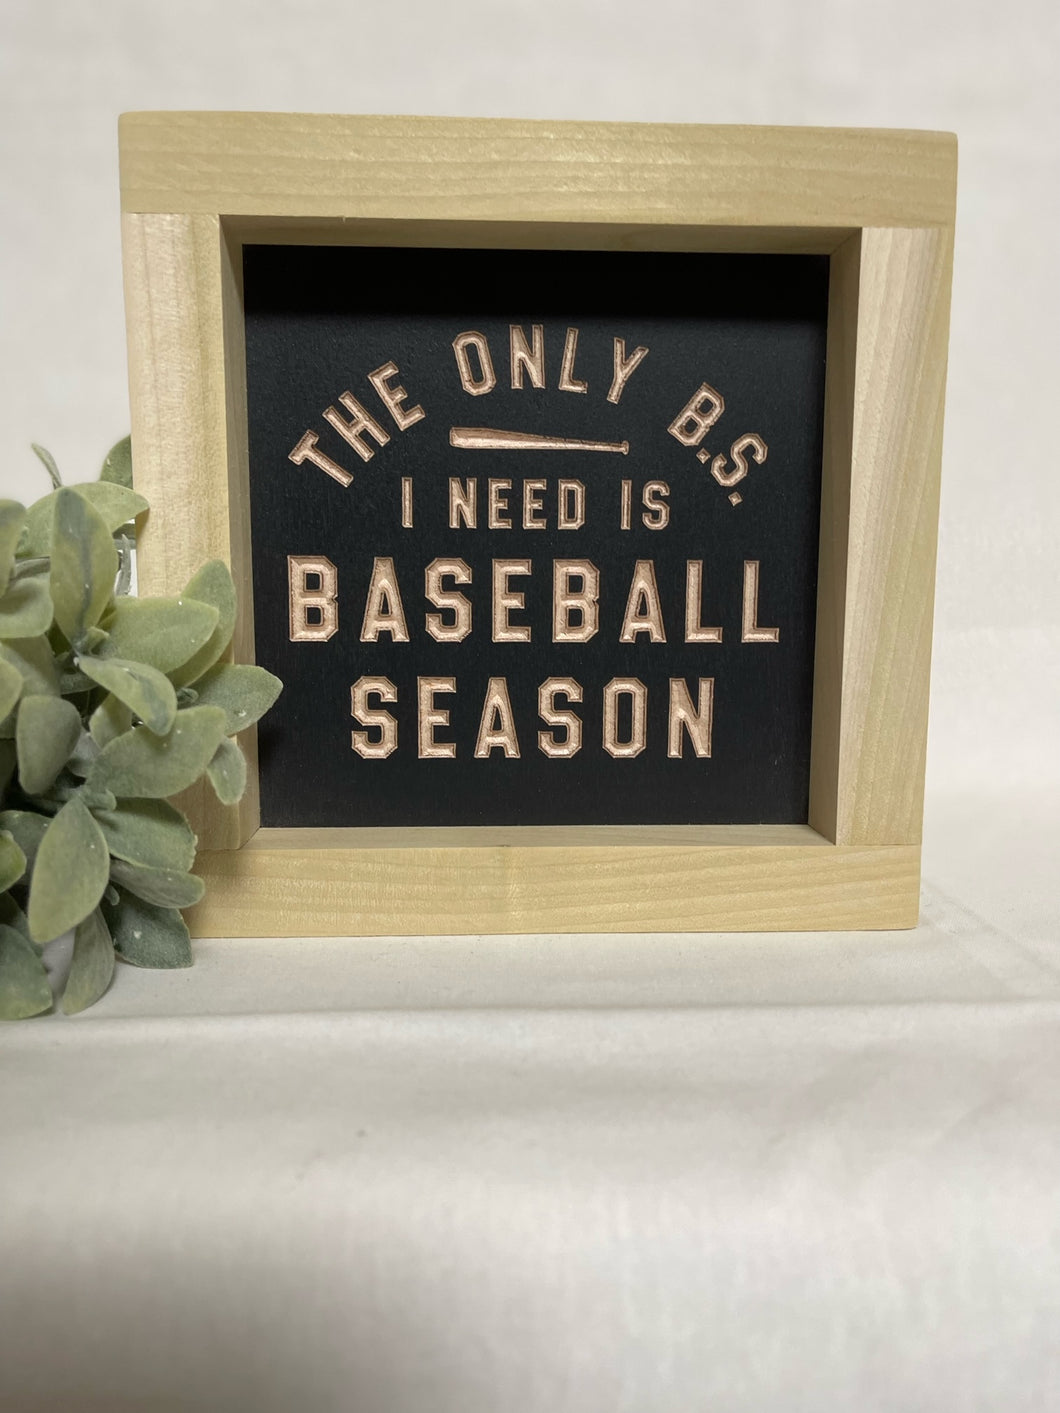 The Only BS I Need Is Baseball Season 5X5 Wood Sign